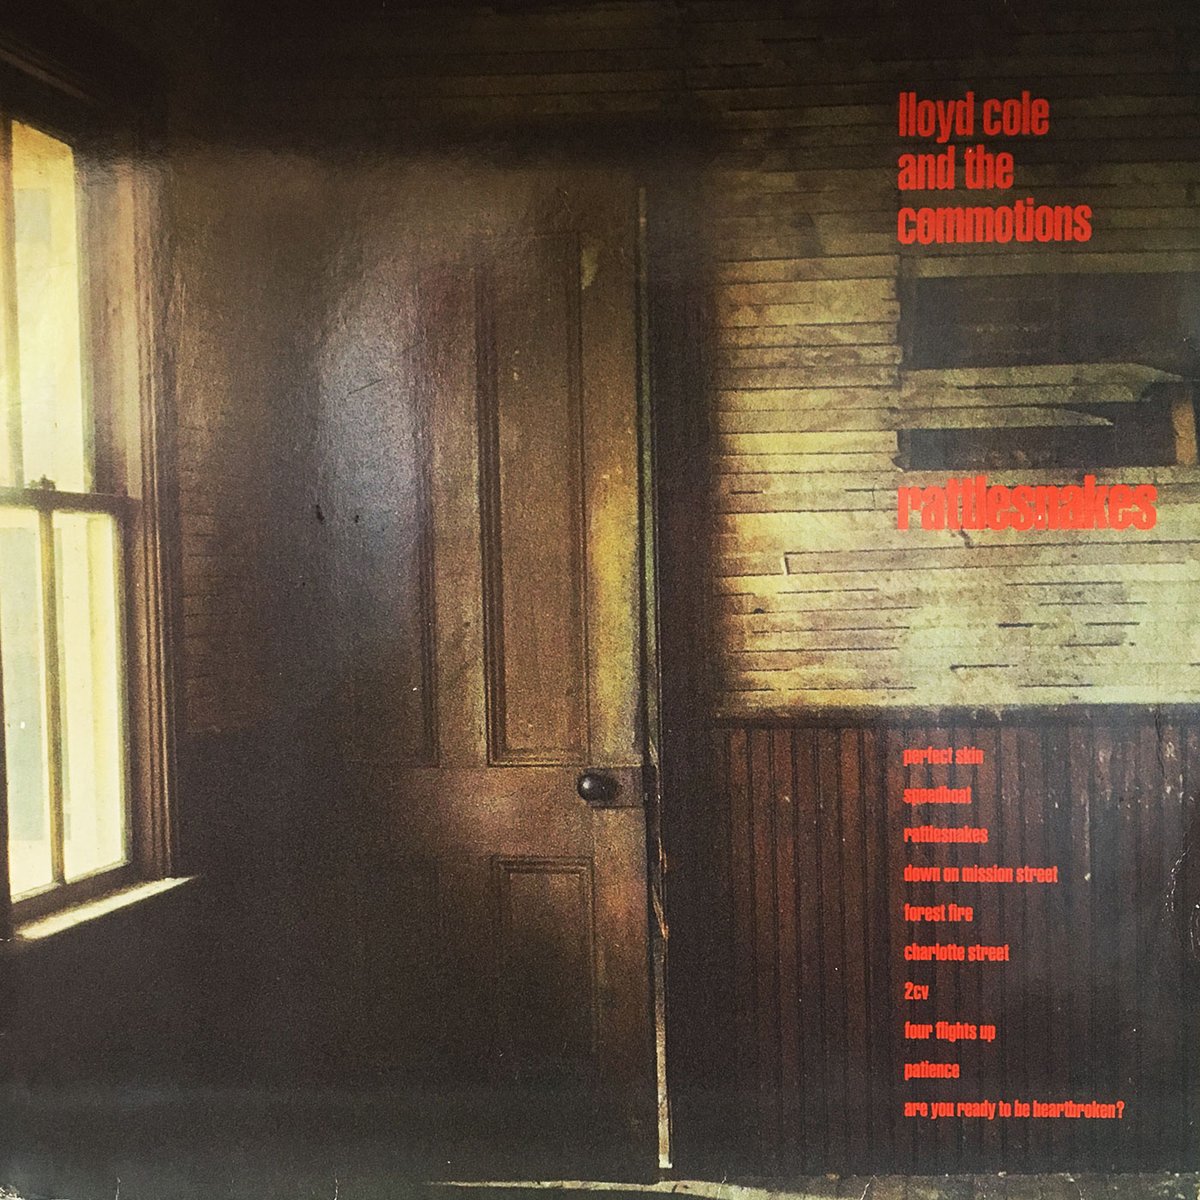 #Top10AlbumOneTrackOne

Day 1 (unranked)
Artist: Lloyd Cole & The Commotions
Song: Perfect Skin
Album: Rattlesnakes
Year: 1984
open.spotify.com/track/4YnHY5Yz…